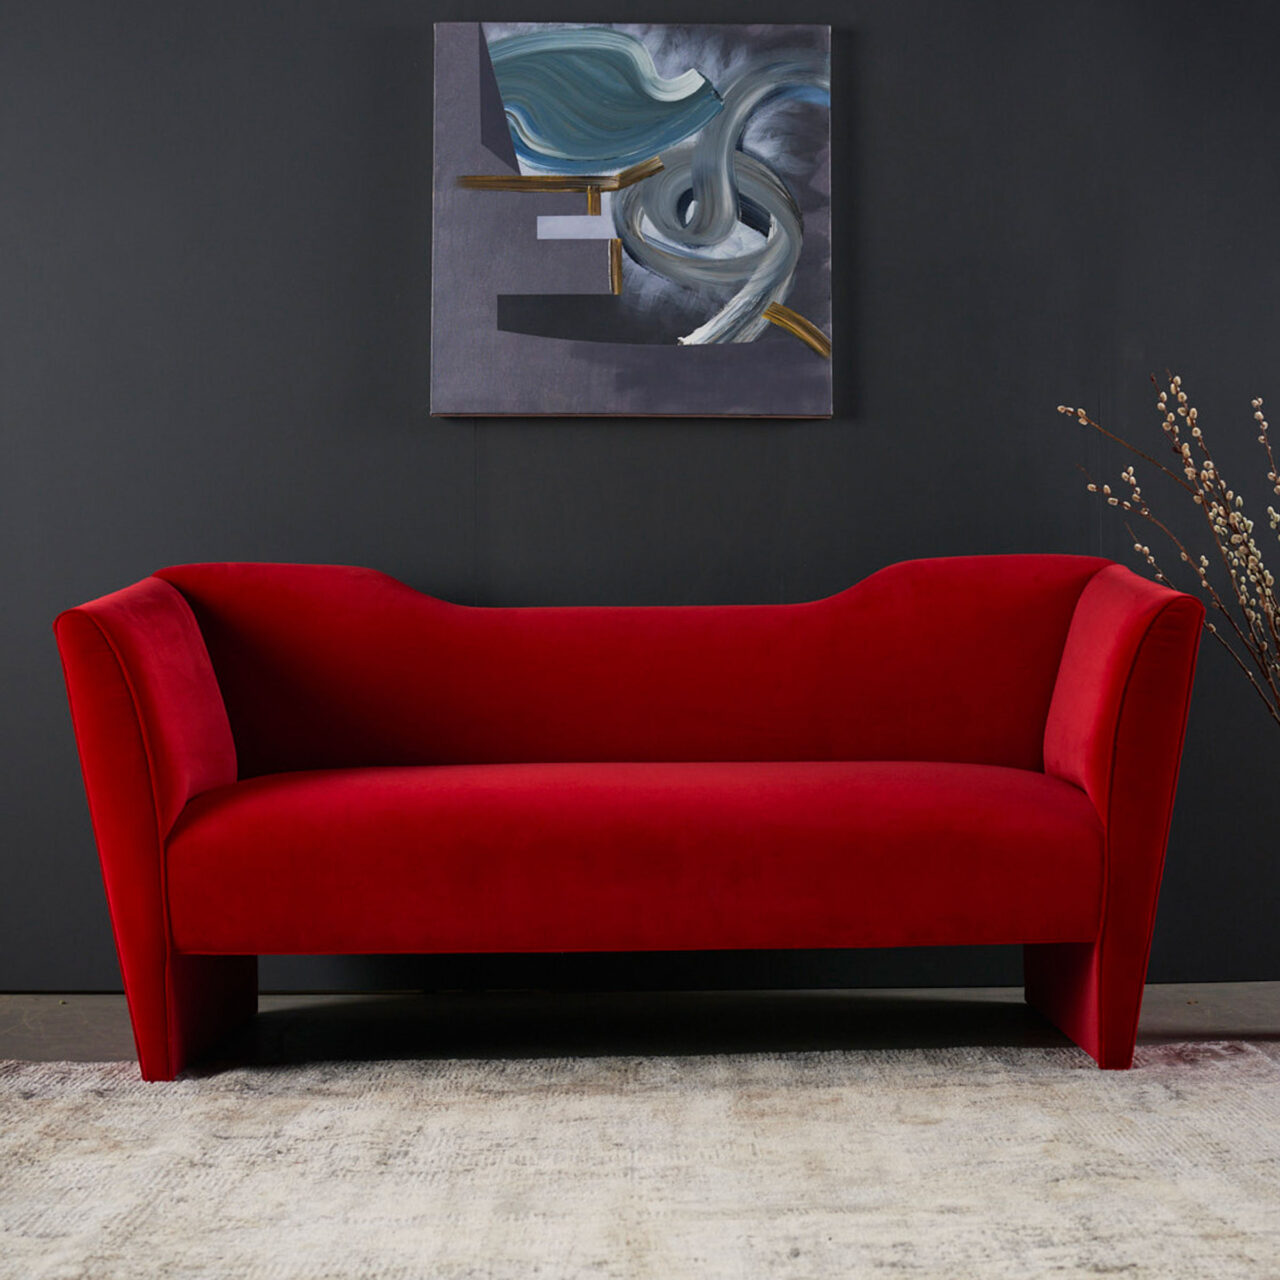 A SENTIENT Nersi sofa in rich red fabric, showcasing a modern silhouette with flowing lines, complemented by abstract art and a rustic rug.